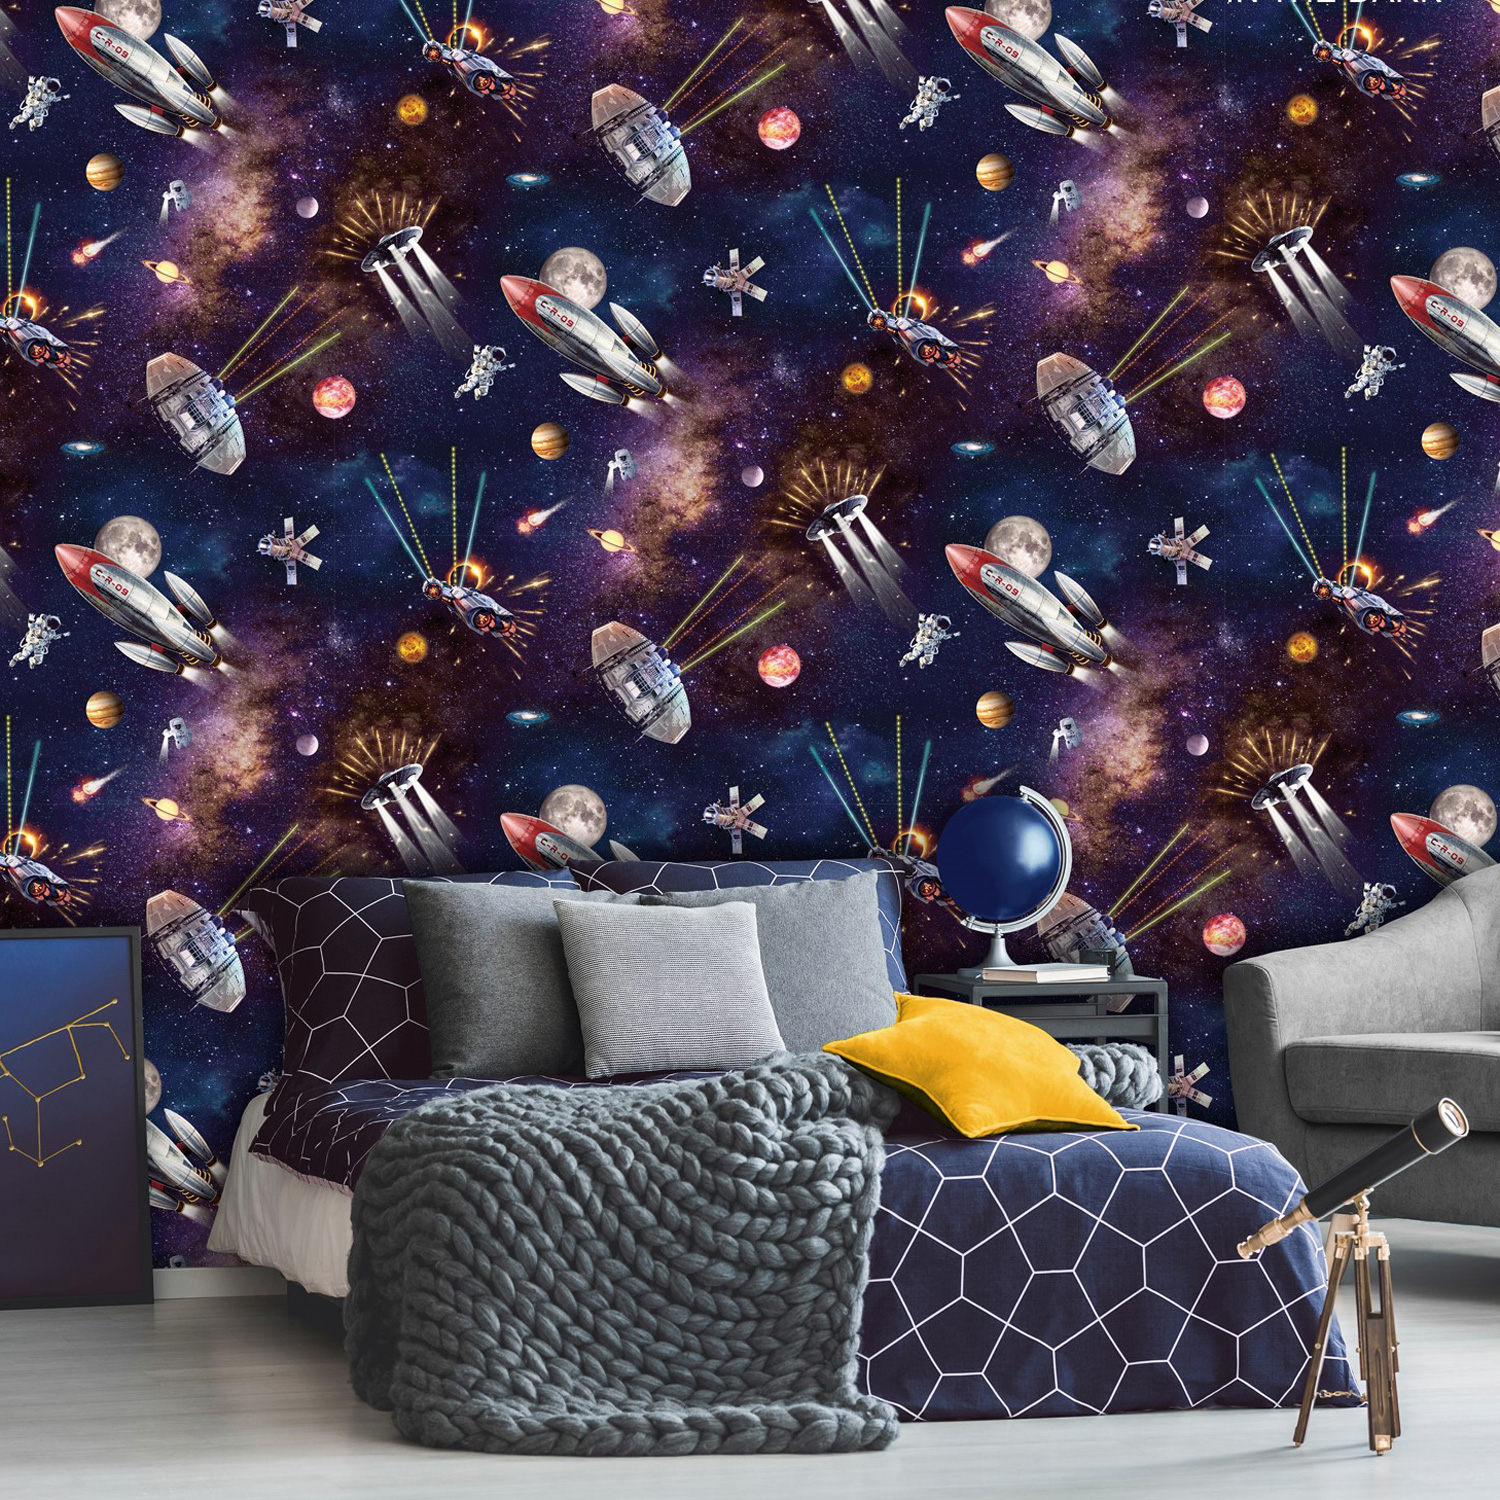 How To Create A Space Themed Children’s Bedroom From Out Of This World